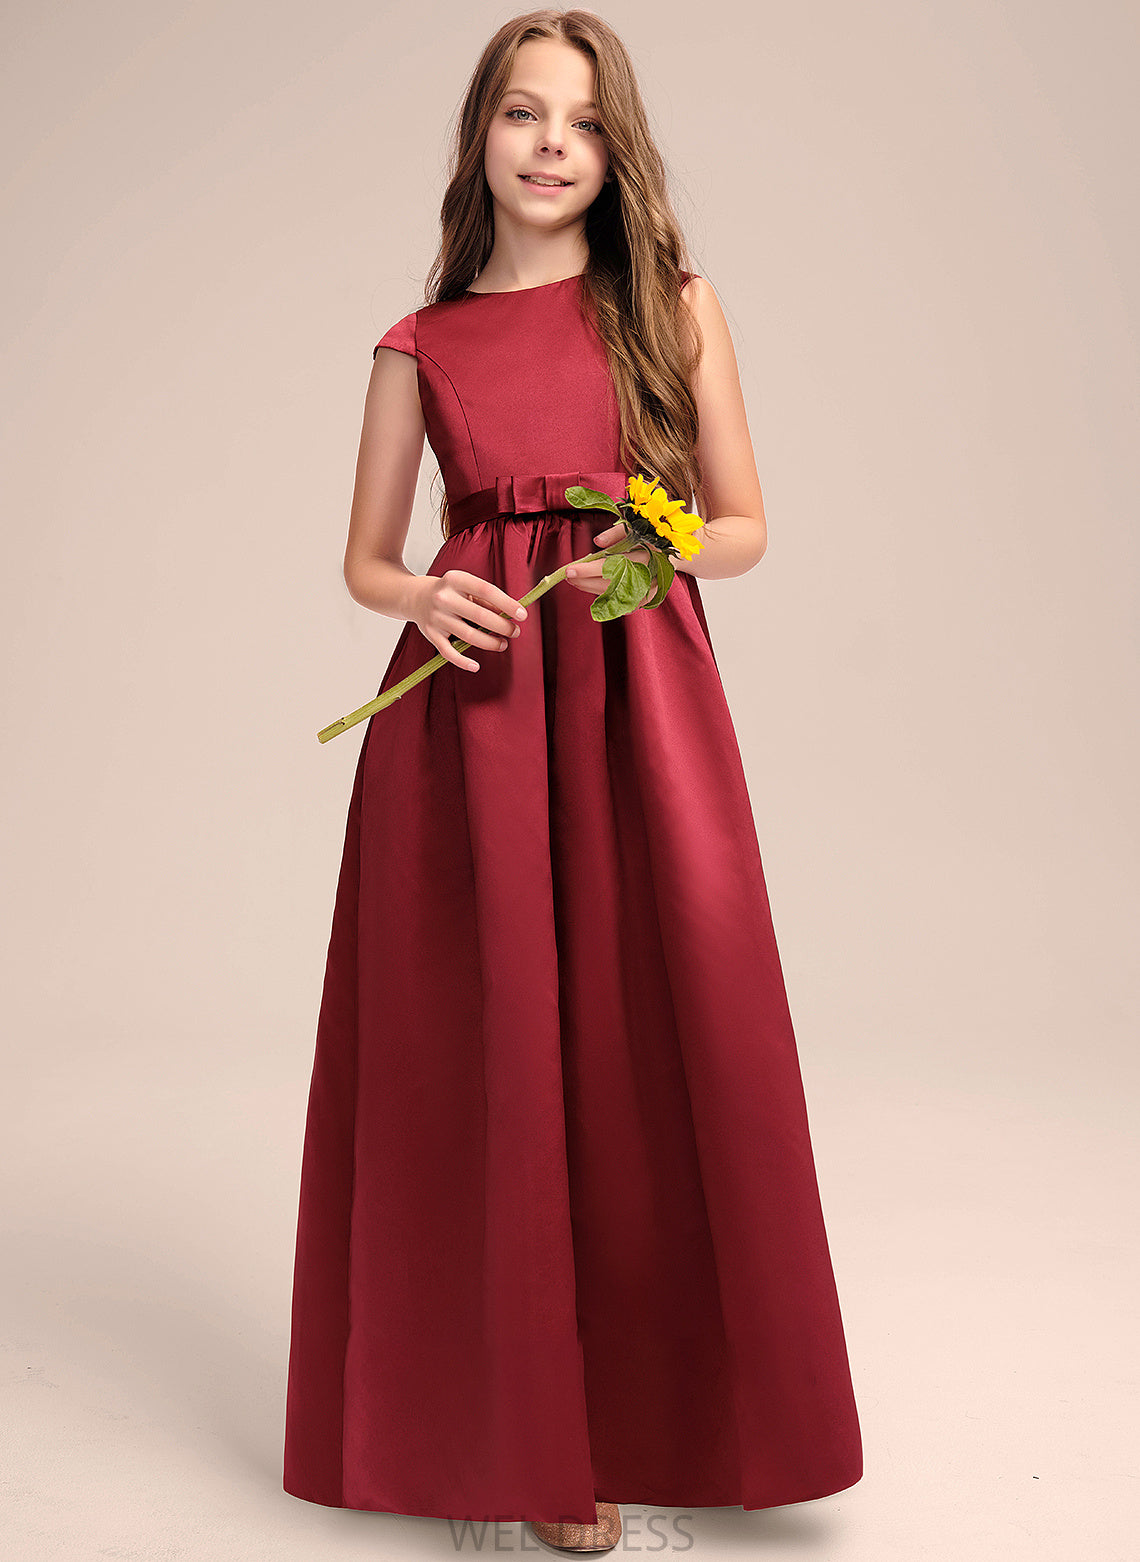 Pockets Scoop Junior Bridesmaid Dresses Neck A-Line Olivia Floor-Length With Bow(s) Satin